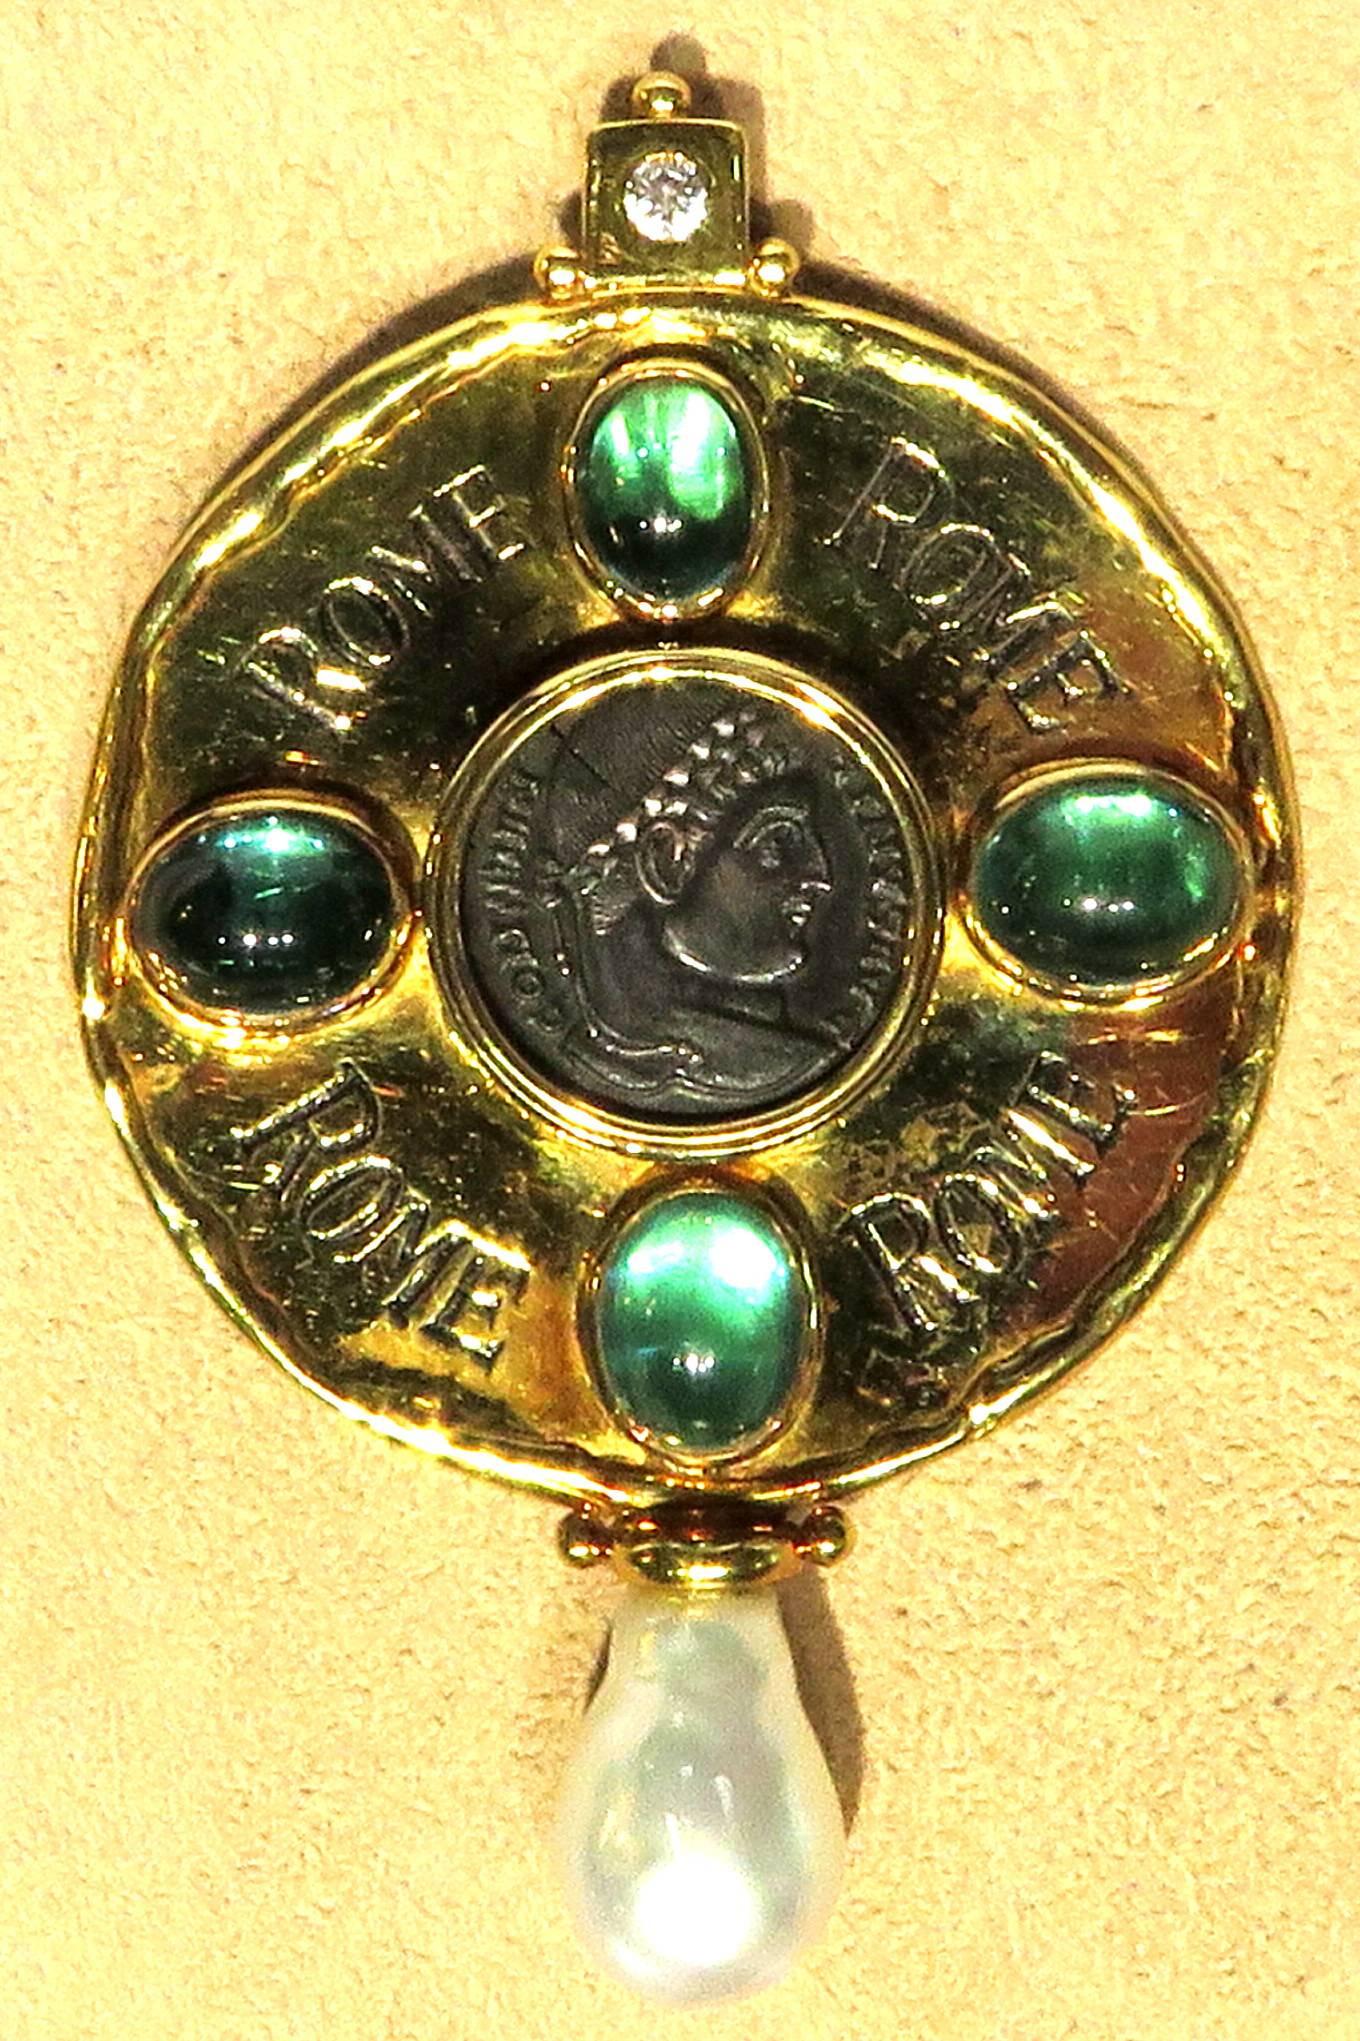 Phenomenal rare large Elizabeth Gage 18 Karat, 4 bezel set green blue tourmaline's, and featuring a Constantine I coin dated 307-337 AD presented in the original box. Pin also has diamond accent and freshwater pearl drop. This pin can easily be worn